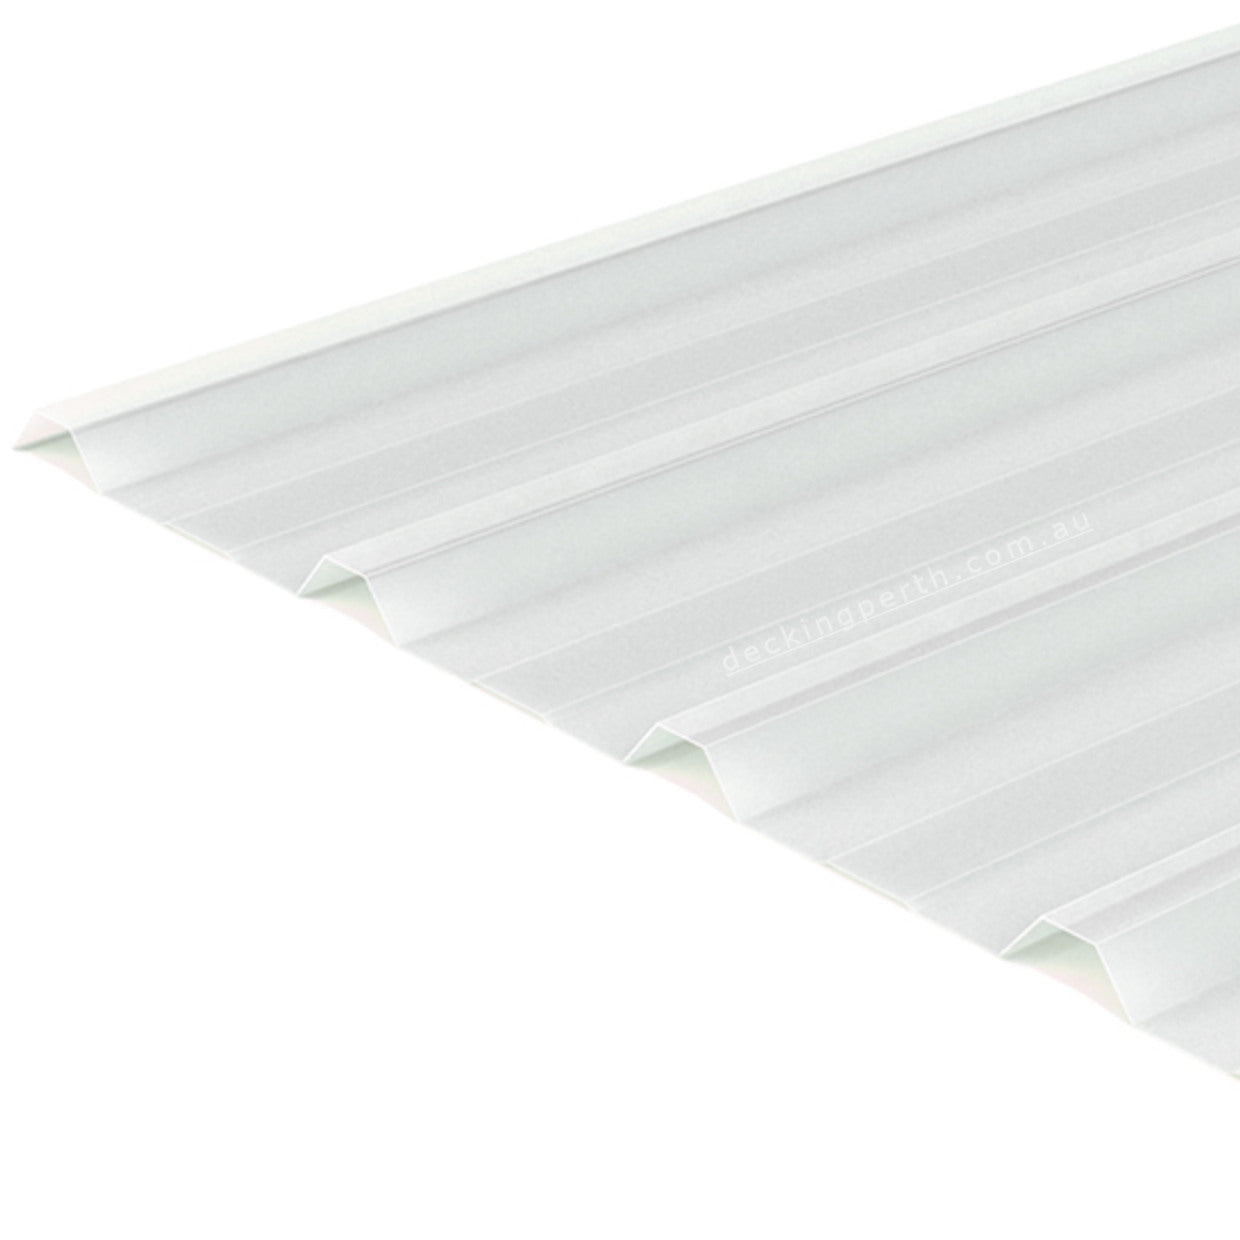 SUNSKY_Industrial_White_Opal_polycarbonate_sheeting_Decking_Perth